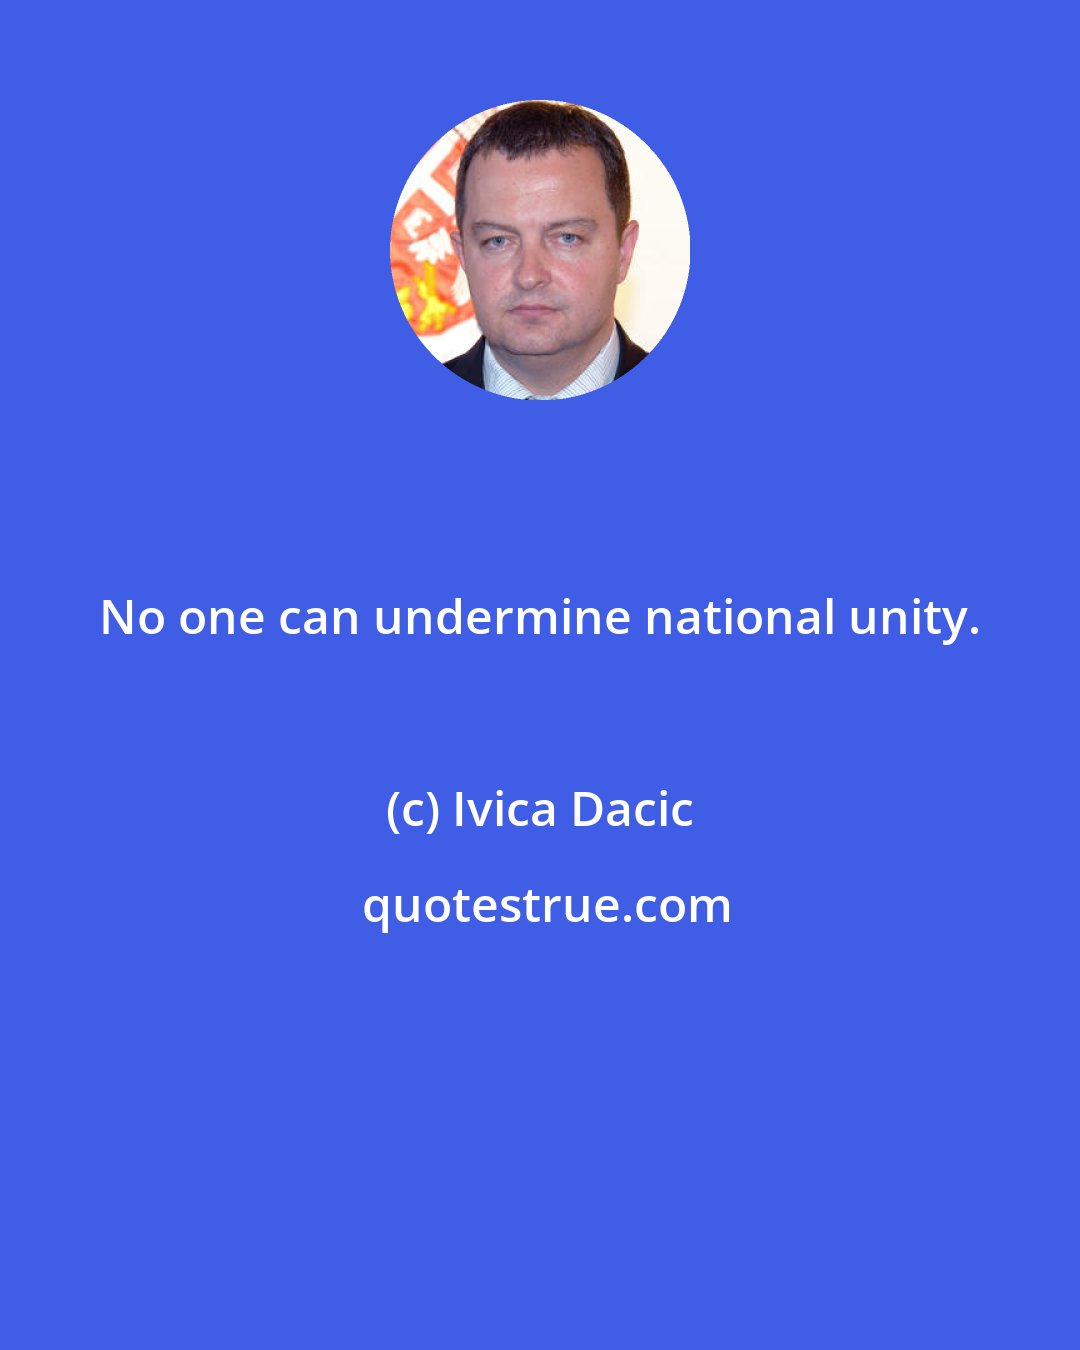 Ivica Dacic: No one can undermine national unity.